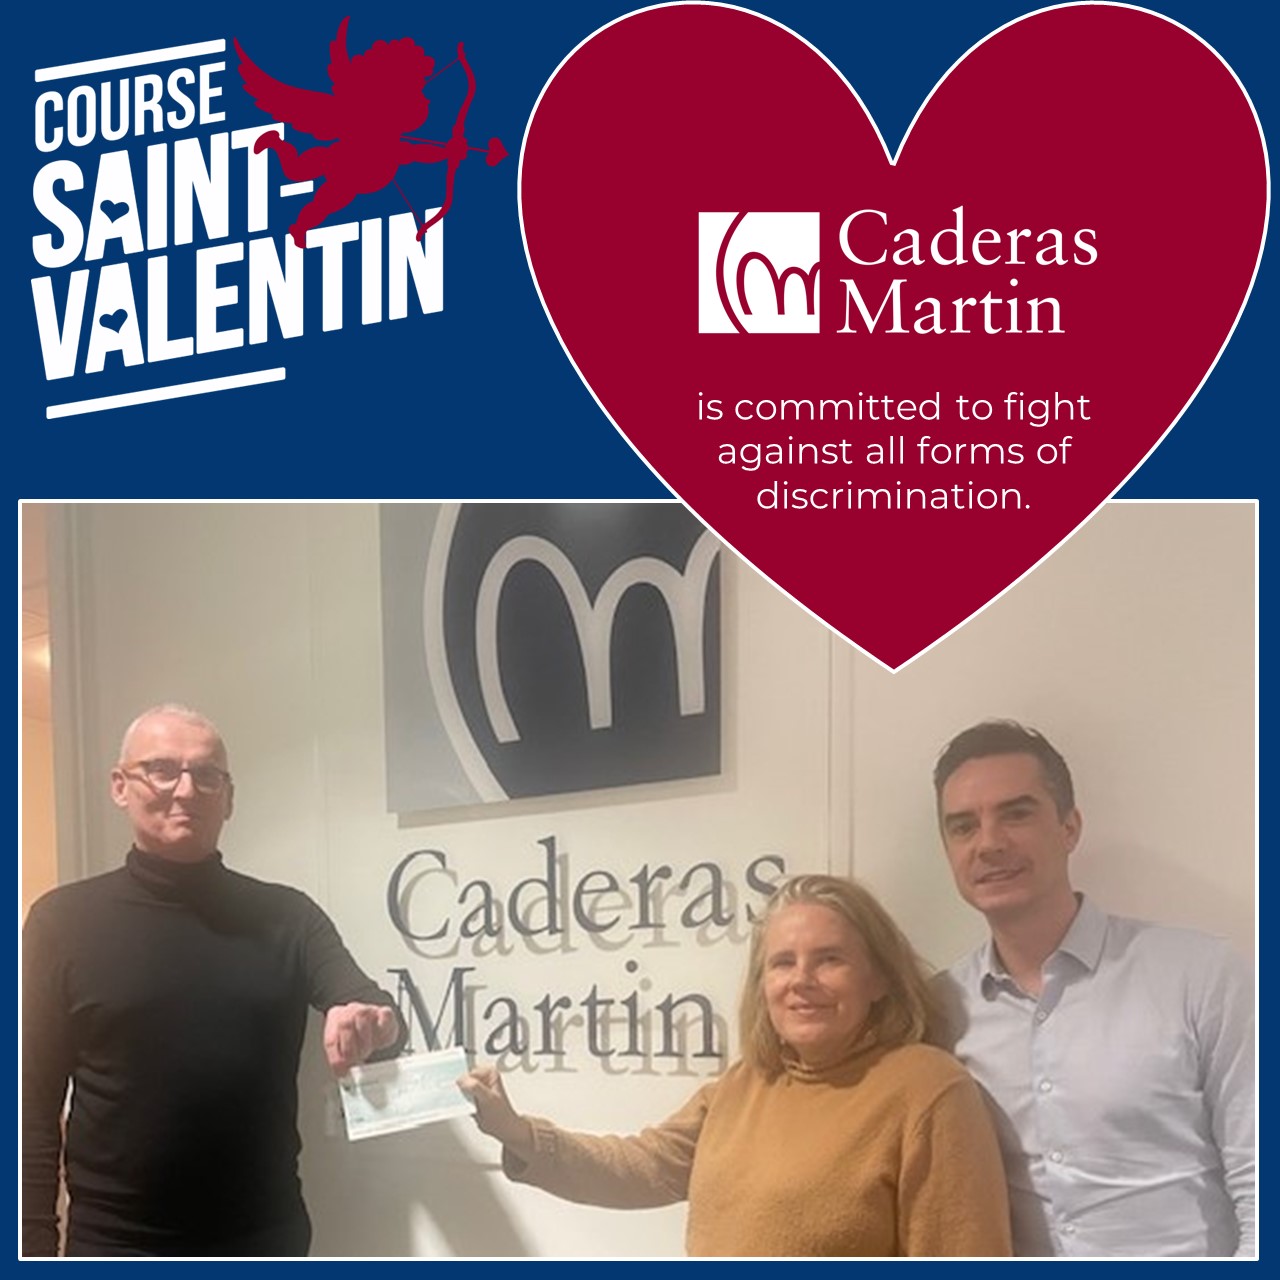 Caderas Martin supports the Valentine's Day race